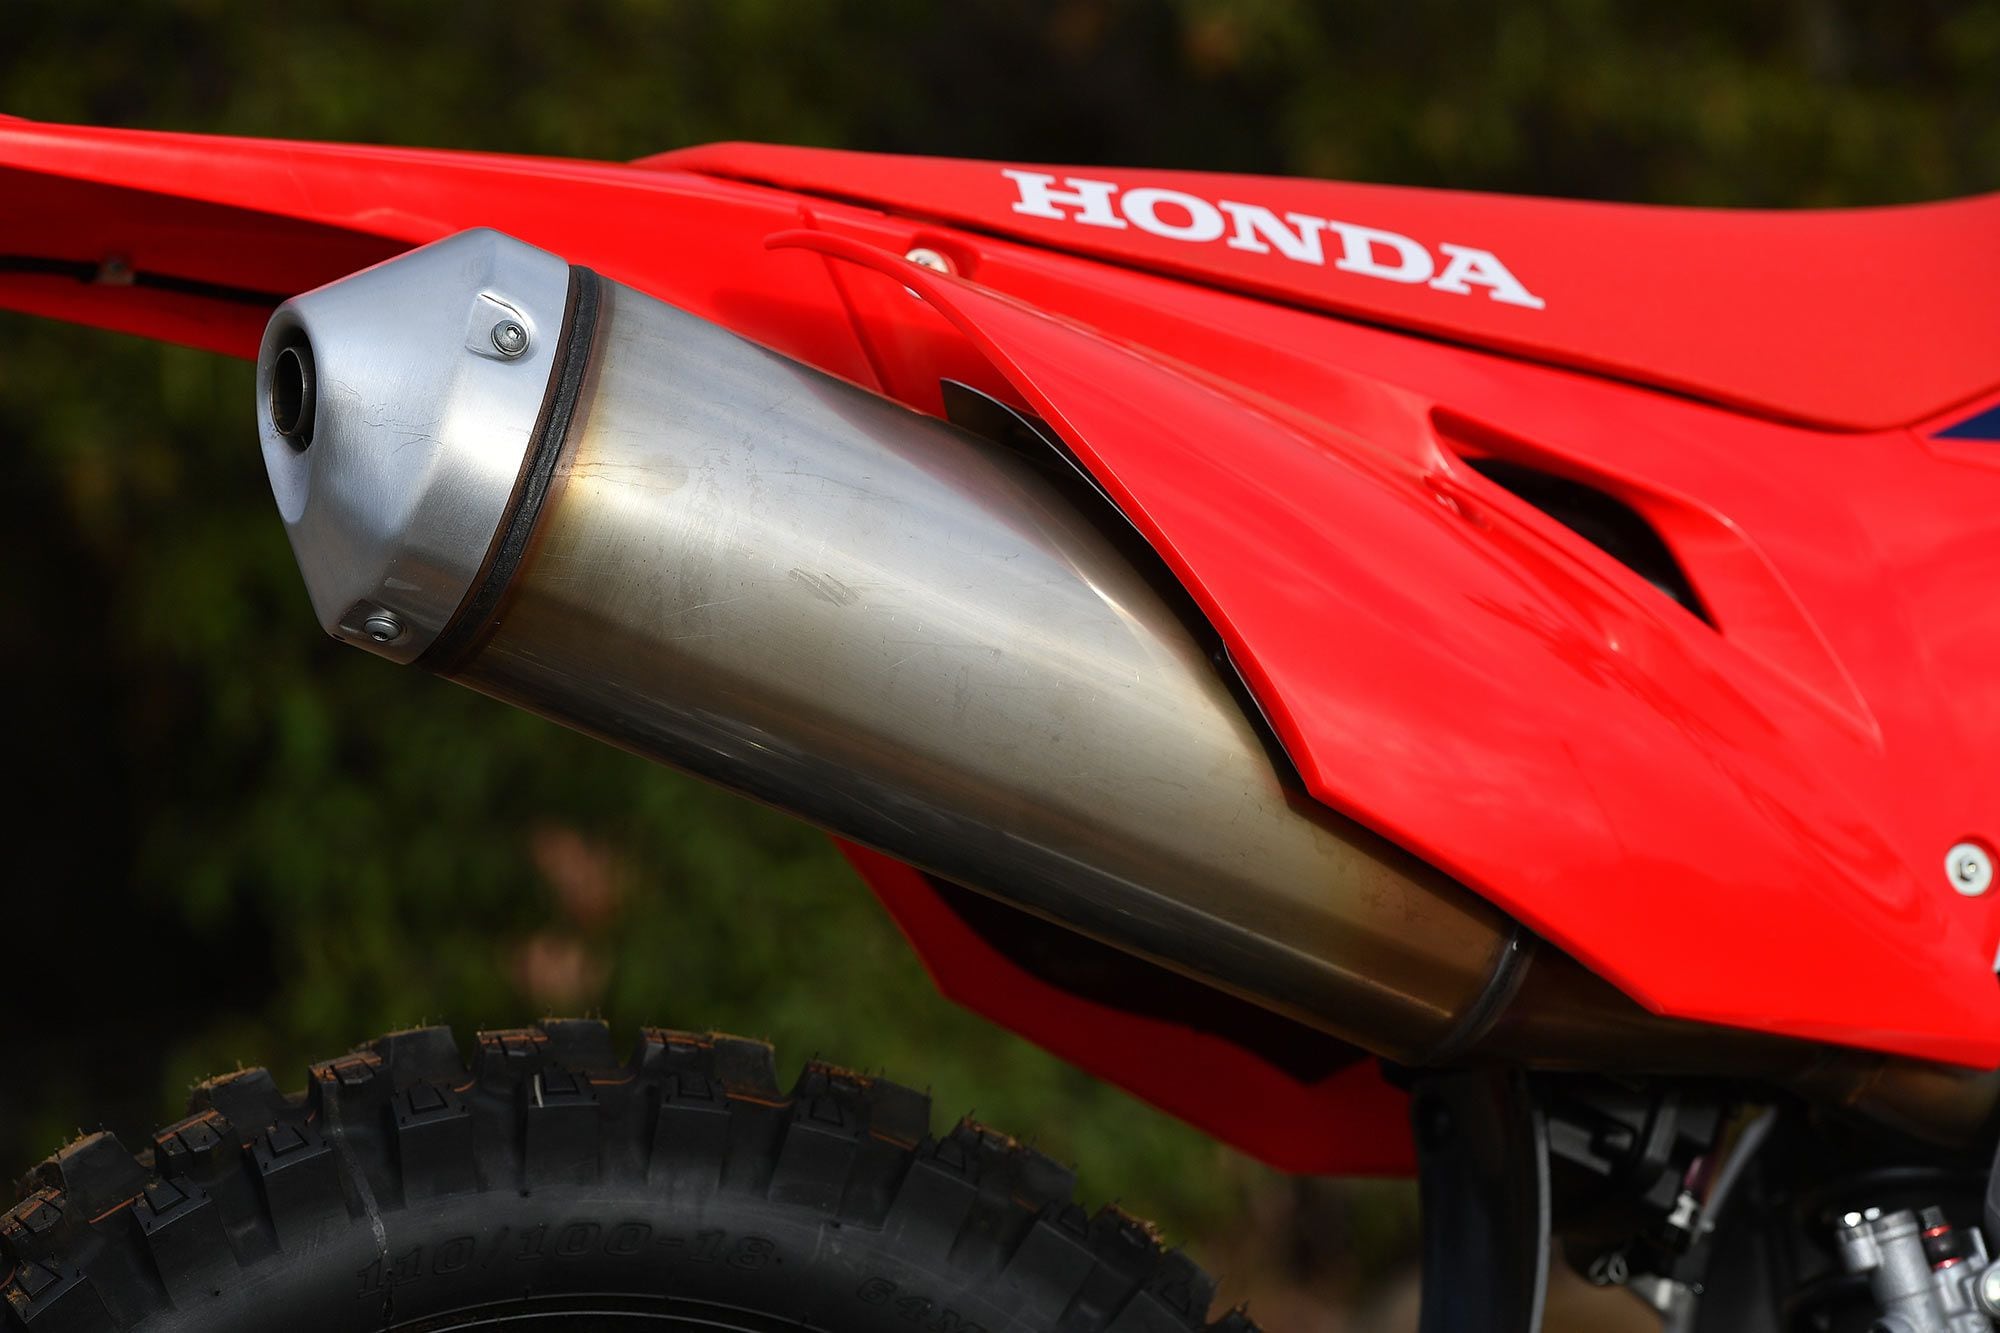 The muffler is CRF450X-specific, differing from that of Honda’s CRF450RL. The exhaust note is pleasant and quiet, but a healthy variety of aftermarket units are available to uncork additional ponies.